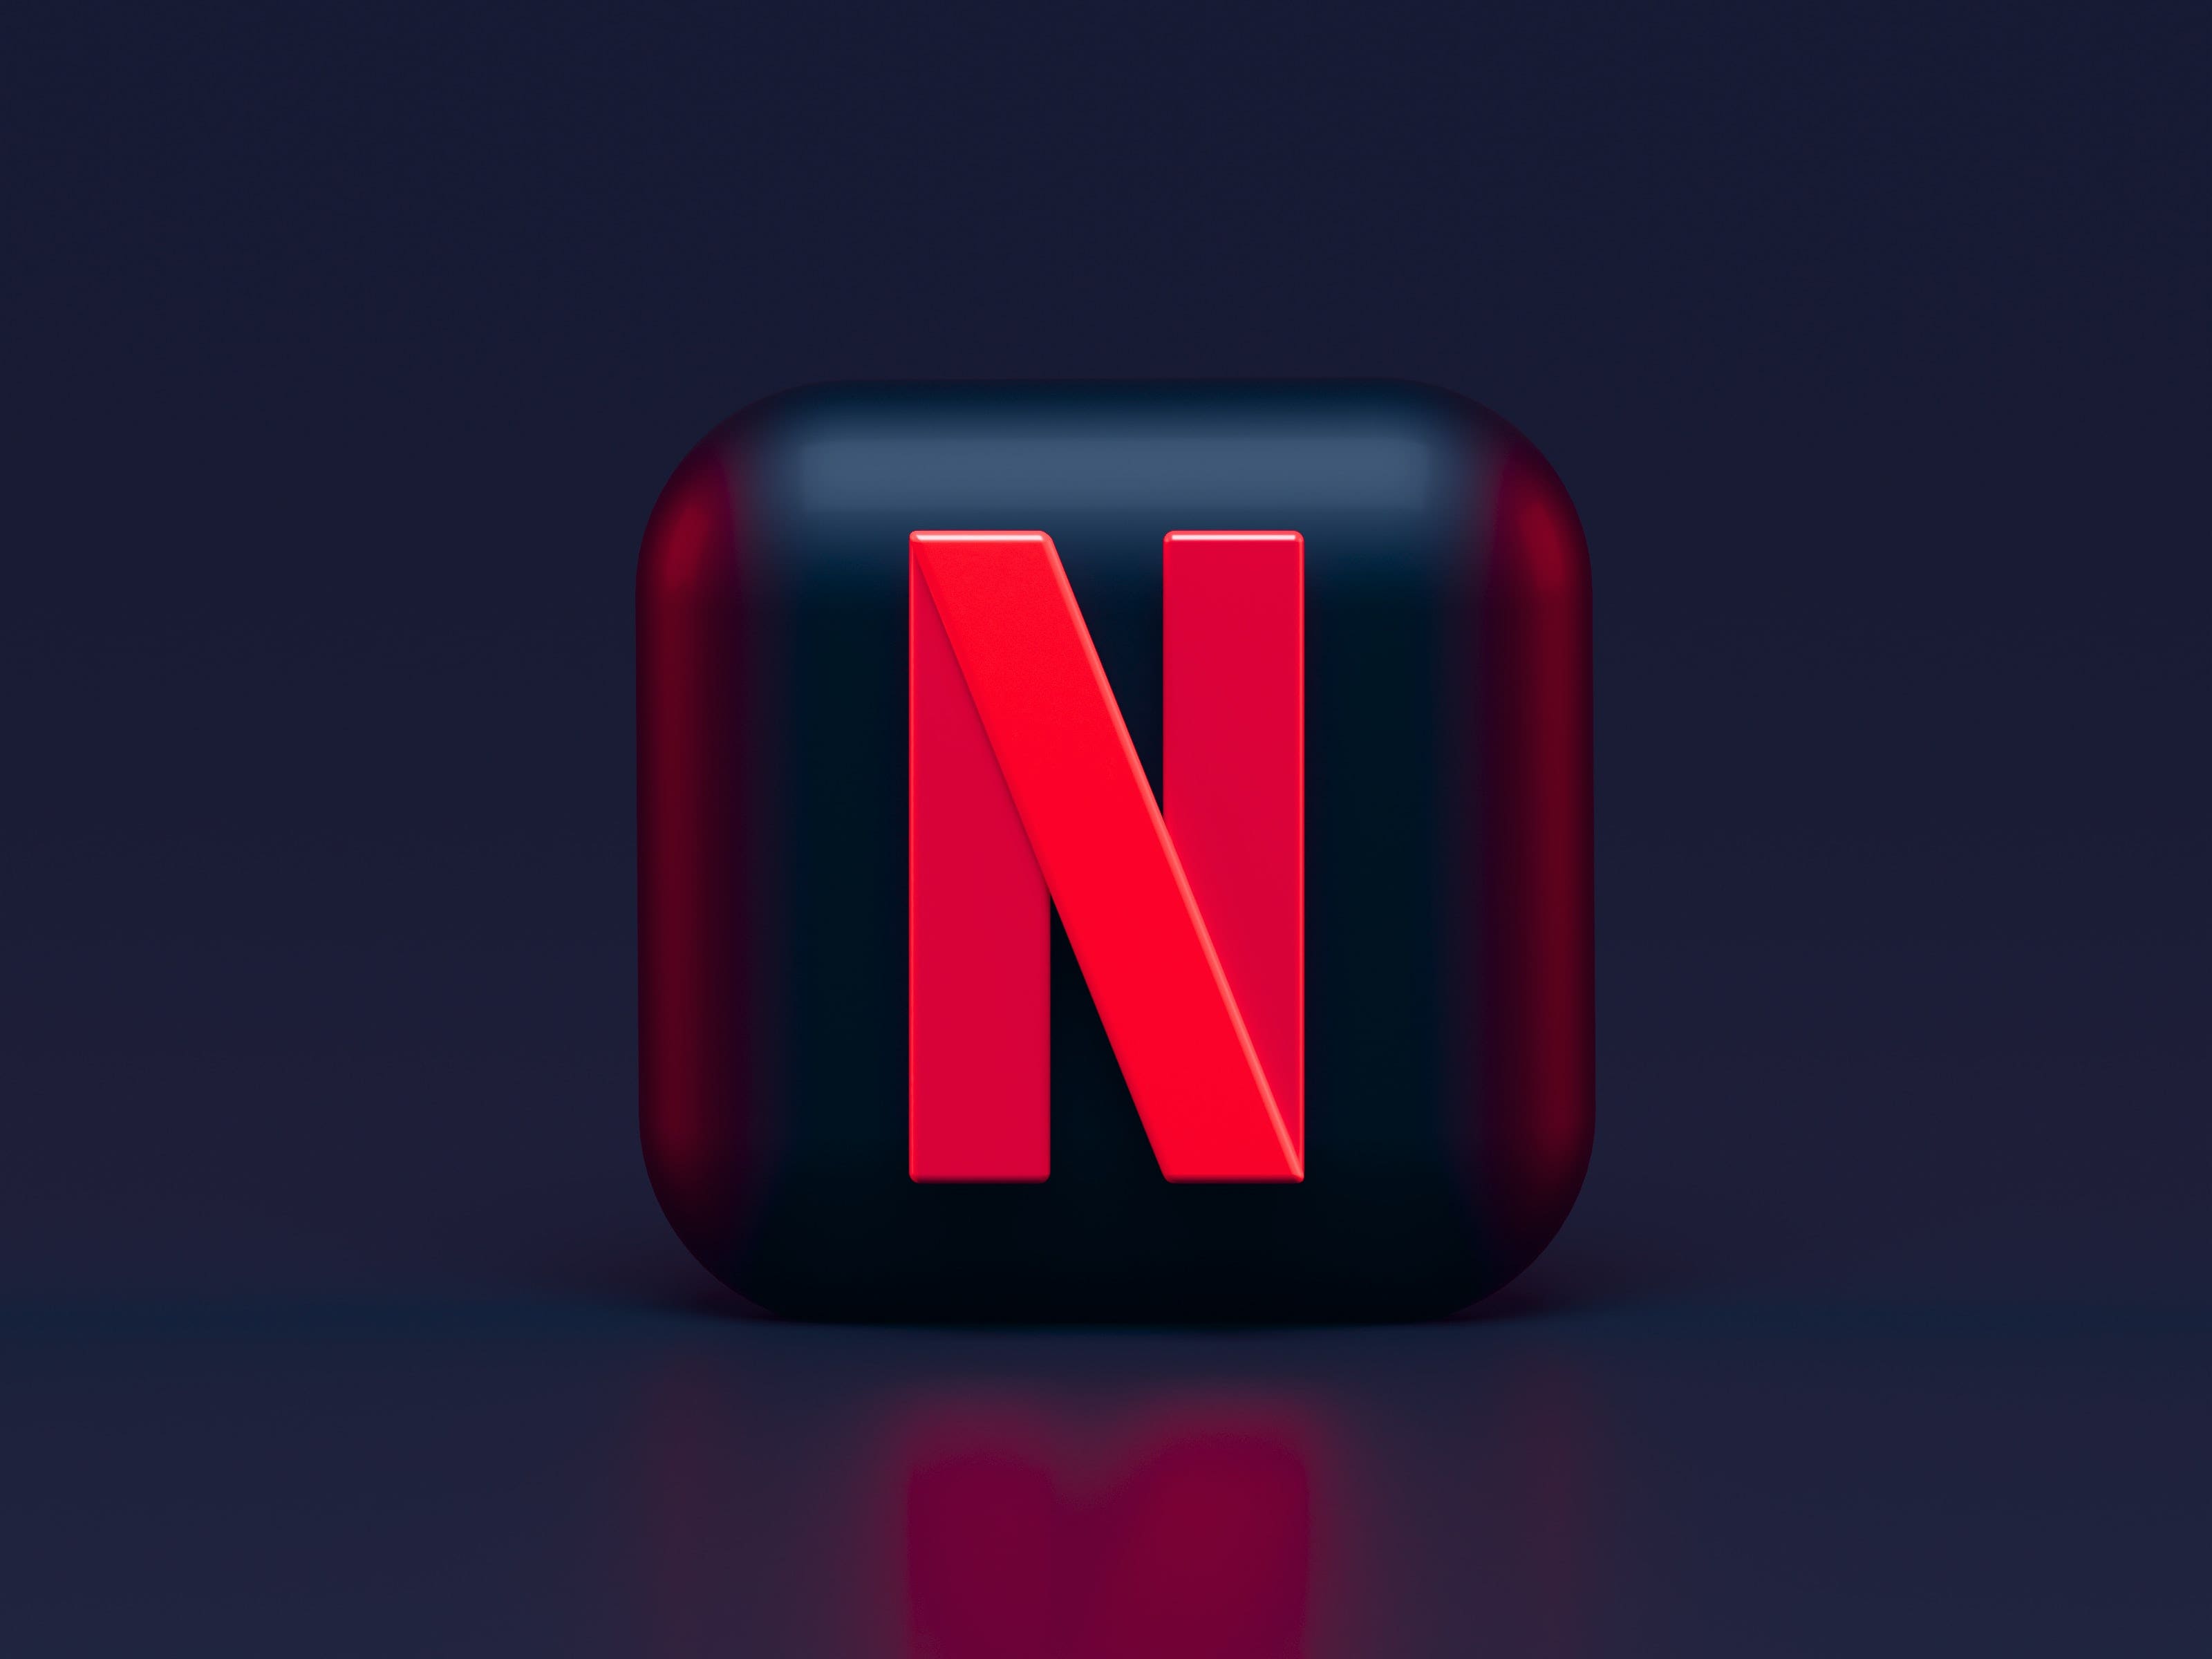 Netflix And Chill Out With The Pricing Rumors: Streamer Denies $7 To $9 Ad-Supported Plan